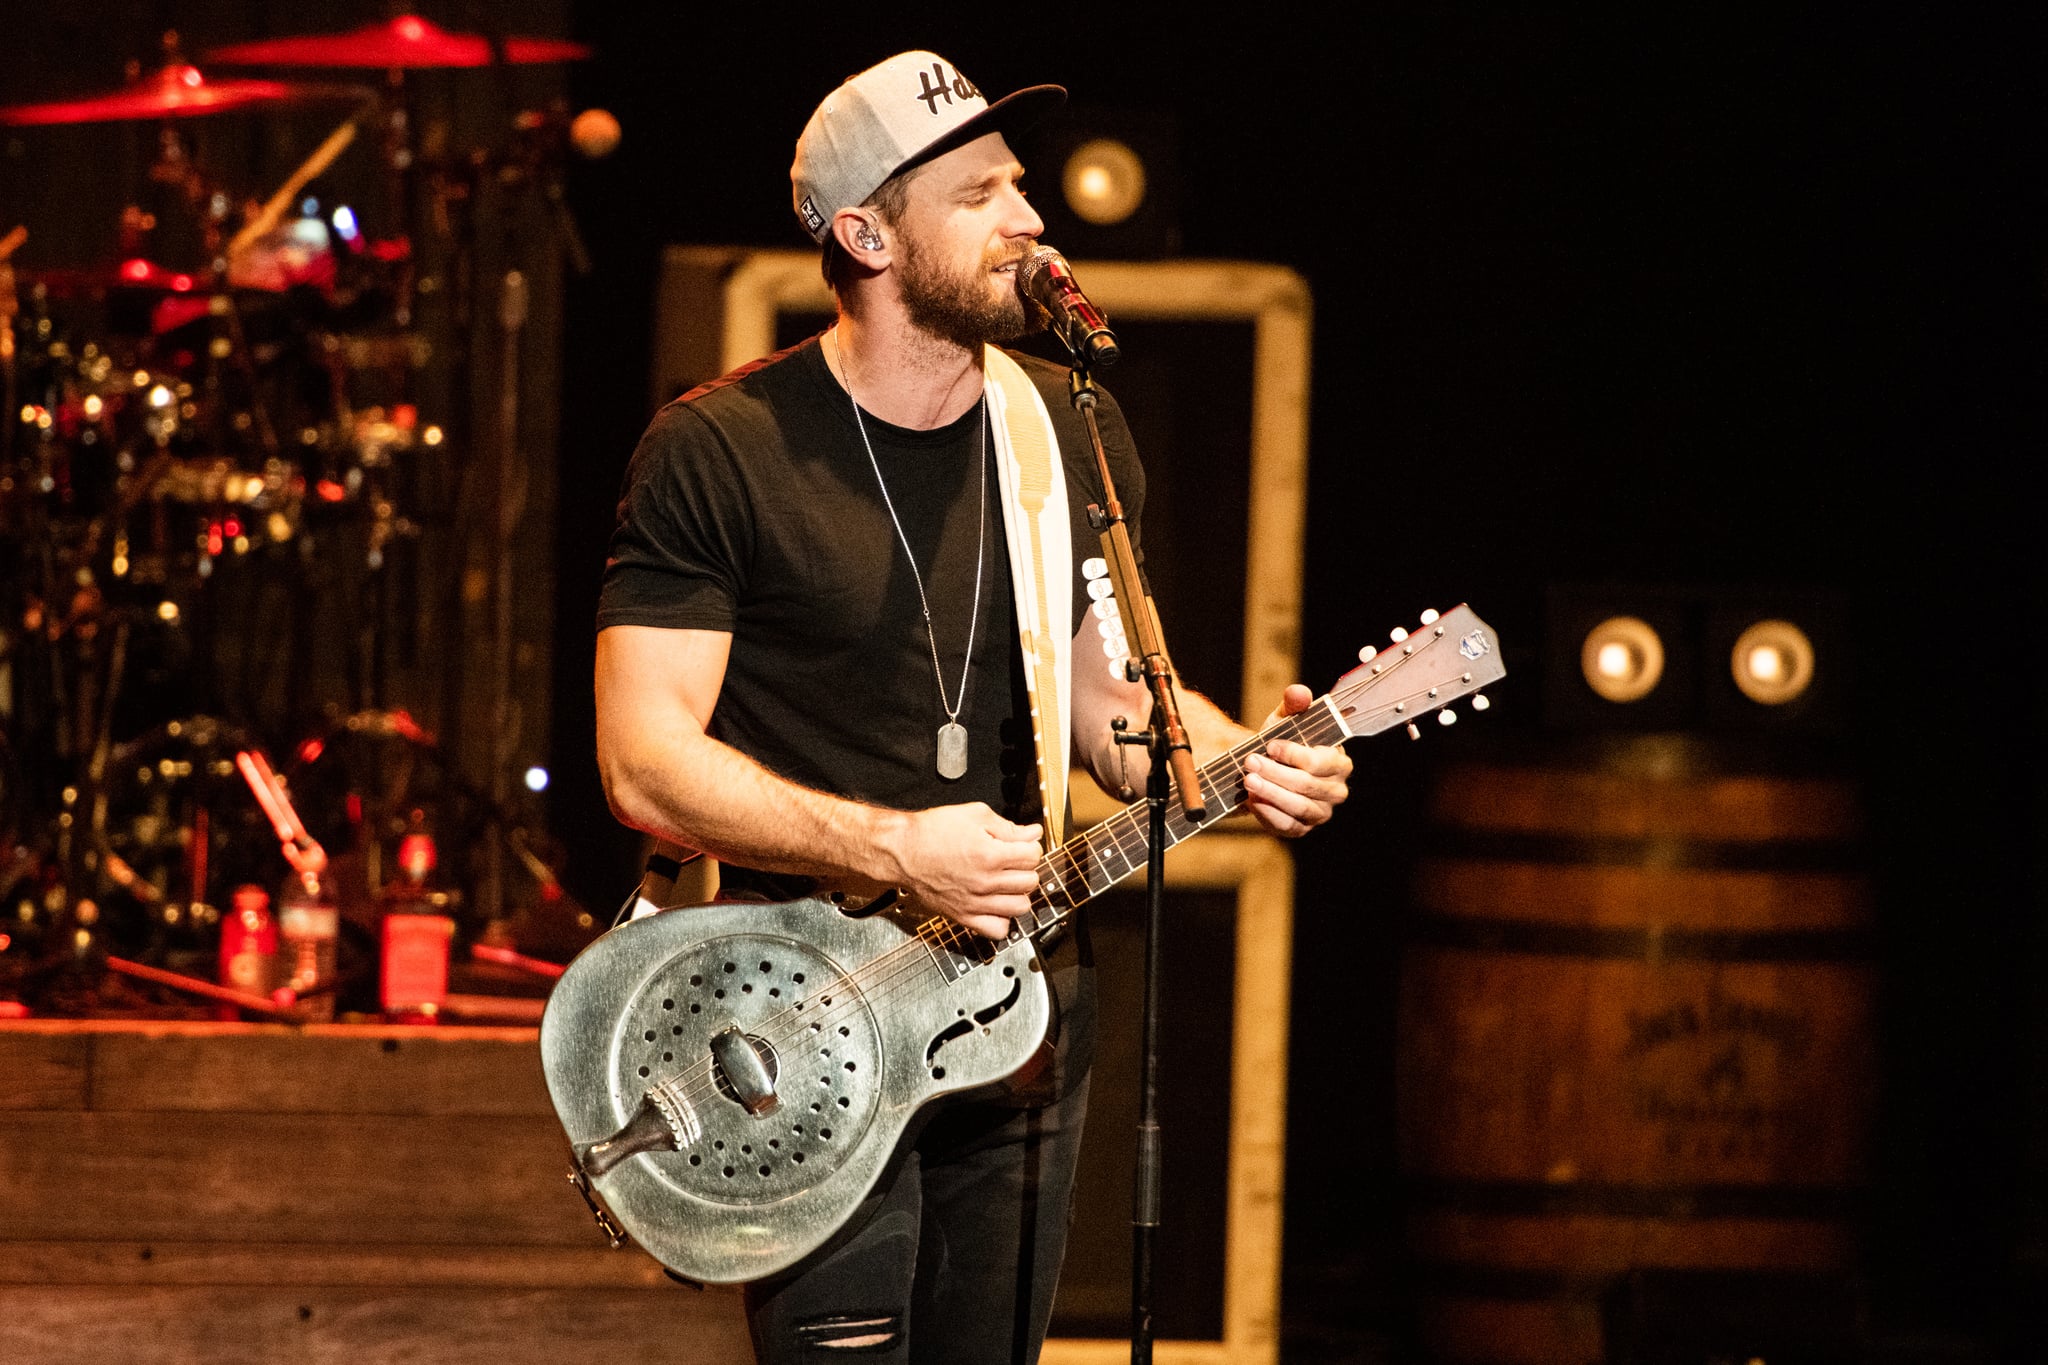 LOS ANGELES, CALIFORNIA - OCTOBER 27: Chase Rice performs at The Wiltern on October 27, 2019 in Los Angeles, California. (Photo by Timothy Norris/Getty Images)